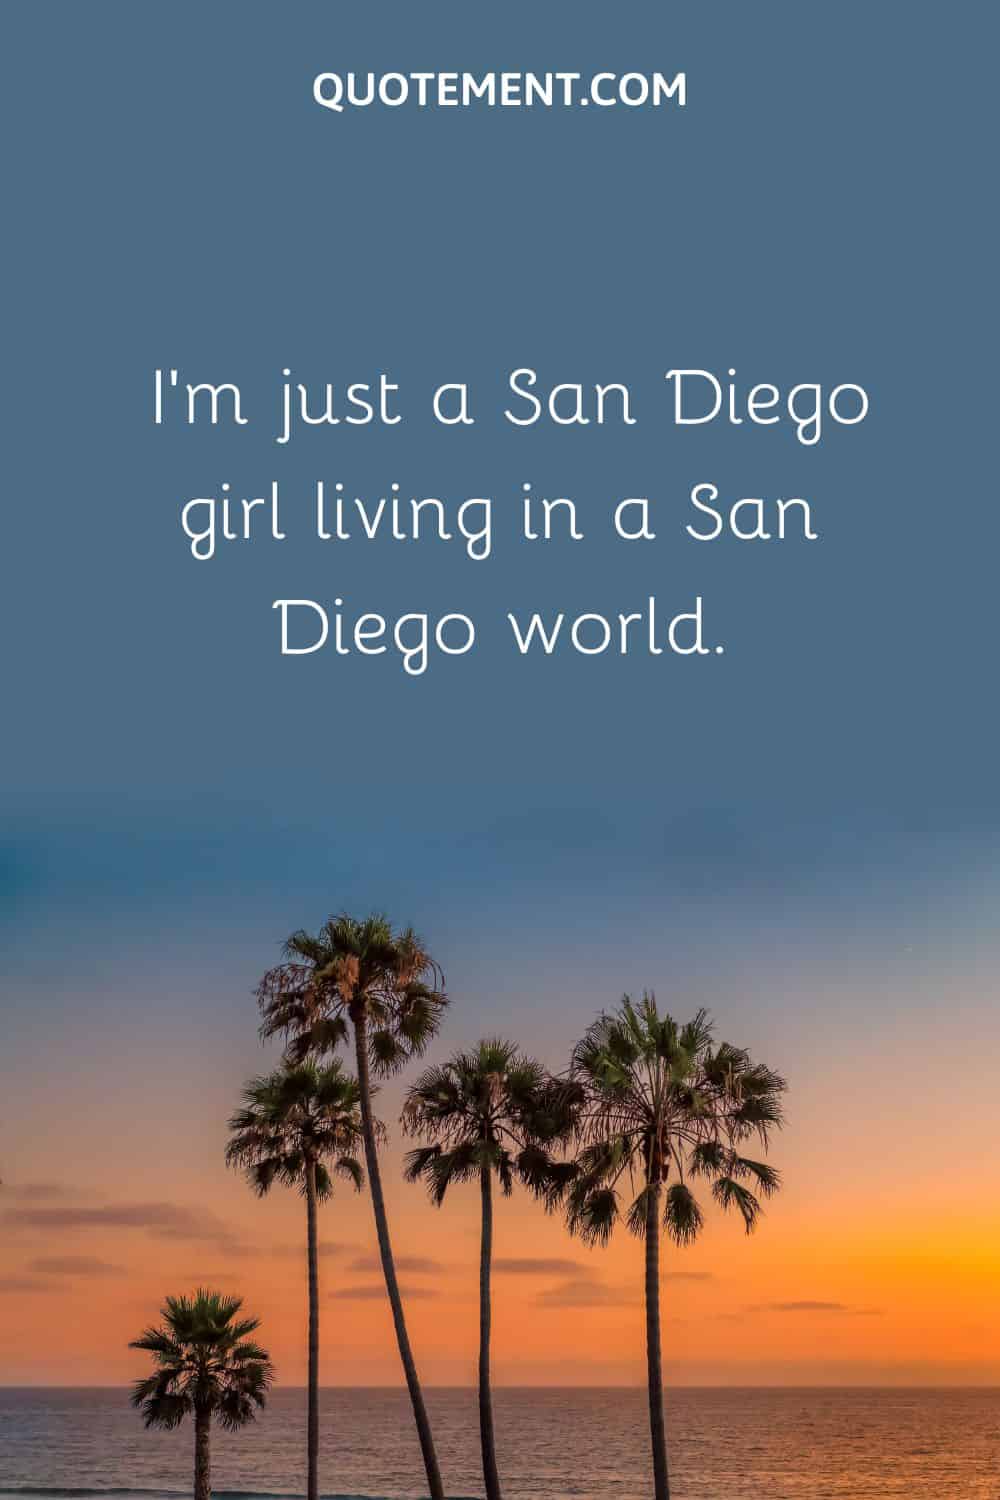 I’m just a San Diego girl living in a San Diego world